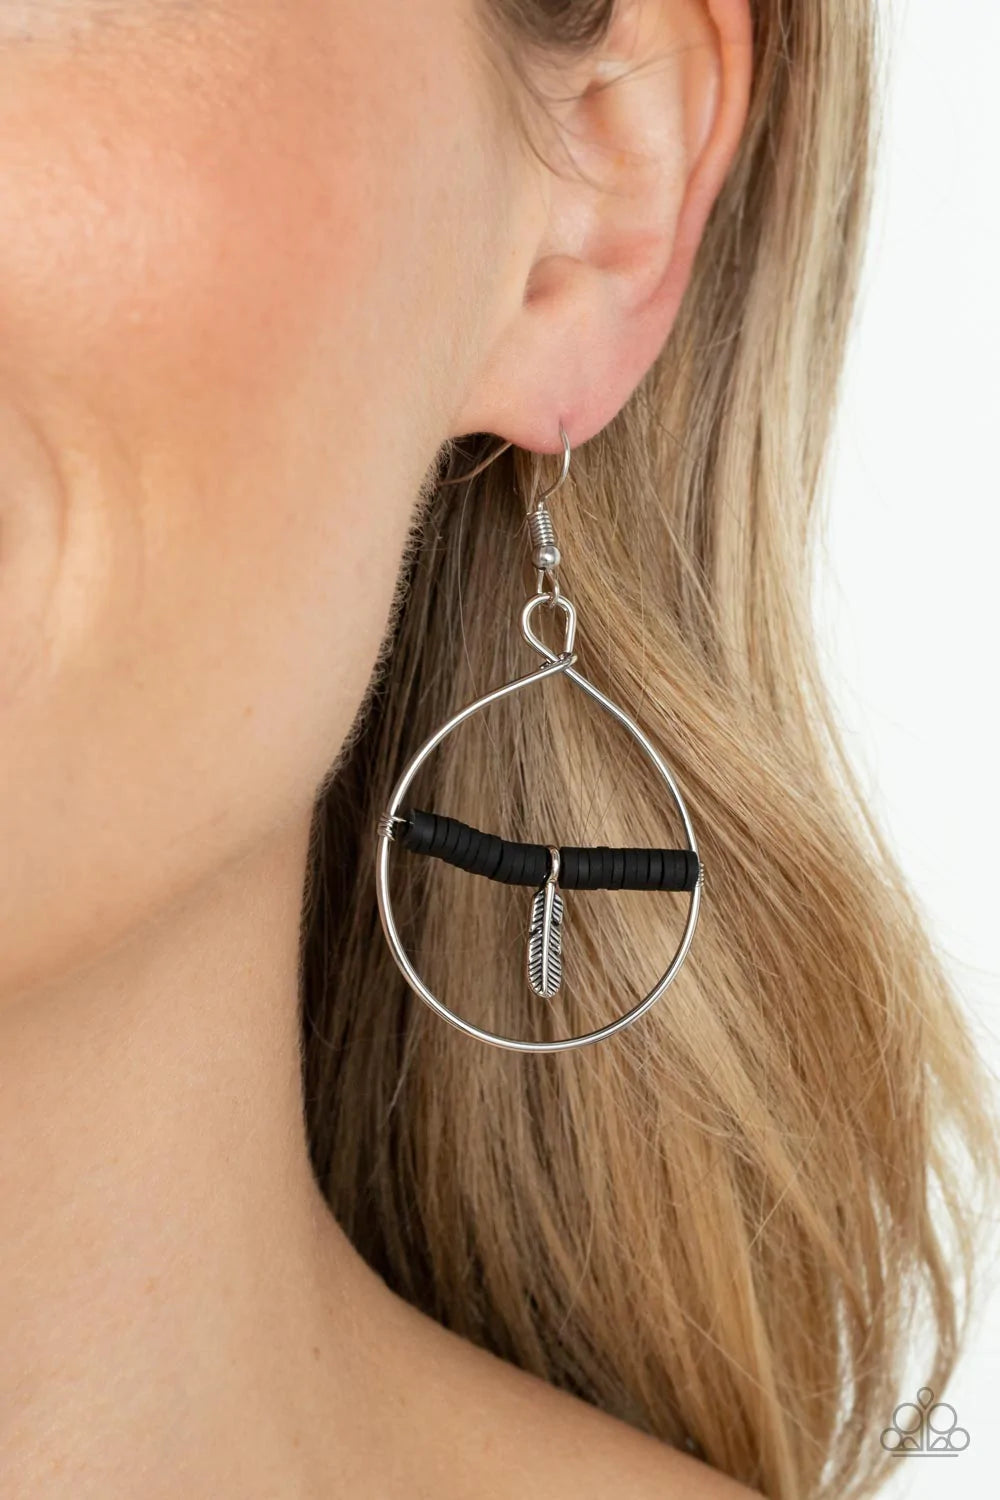 Paparazzi Accessories Free Bird Freedom White: Infused with a dainty silver feather charm, a dainty row of rubbery white discs are threaded along a metallic rod inside an airy silver hoop for a free-spirited fashion. Earring attaches to a standard fishhoo